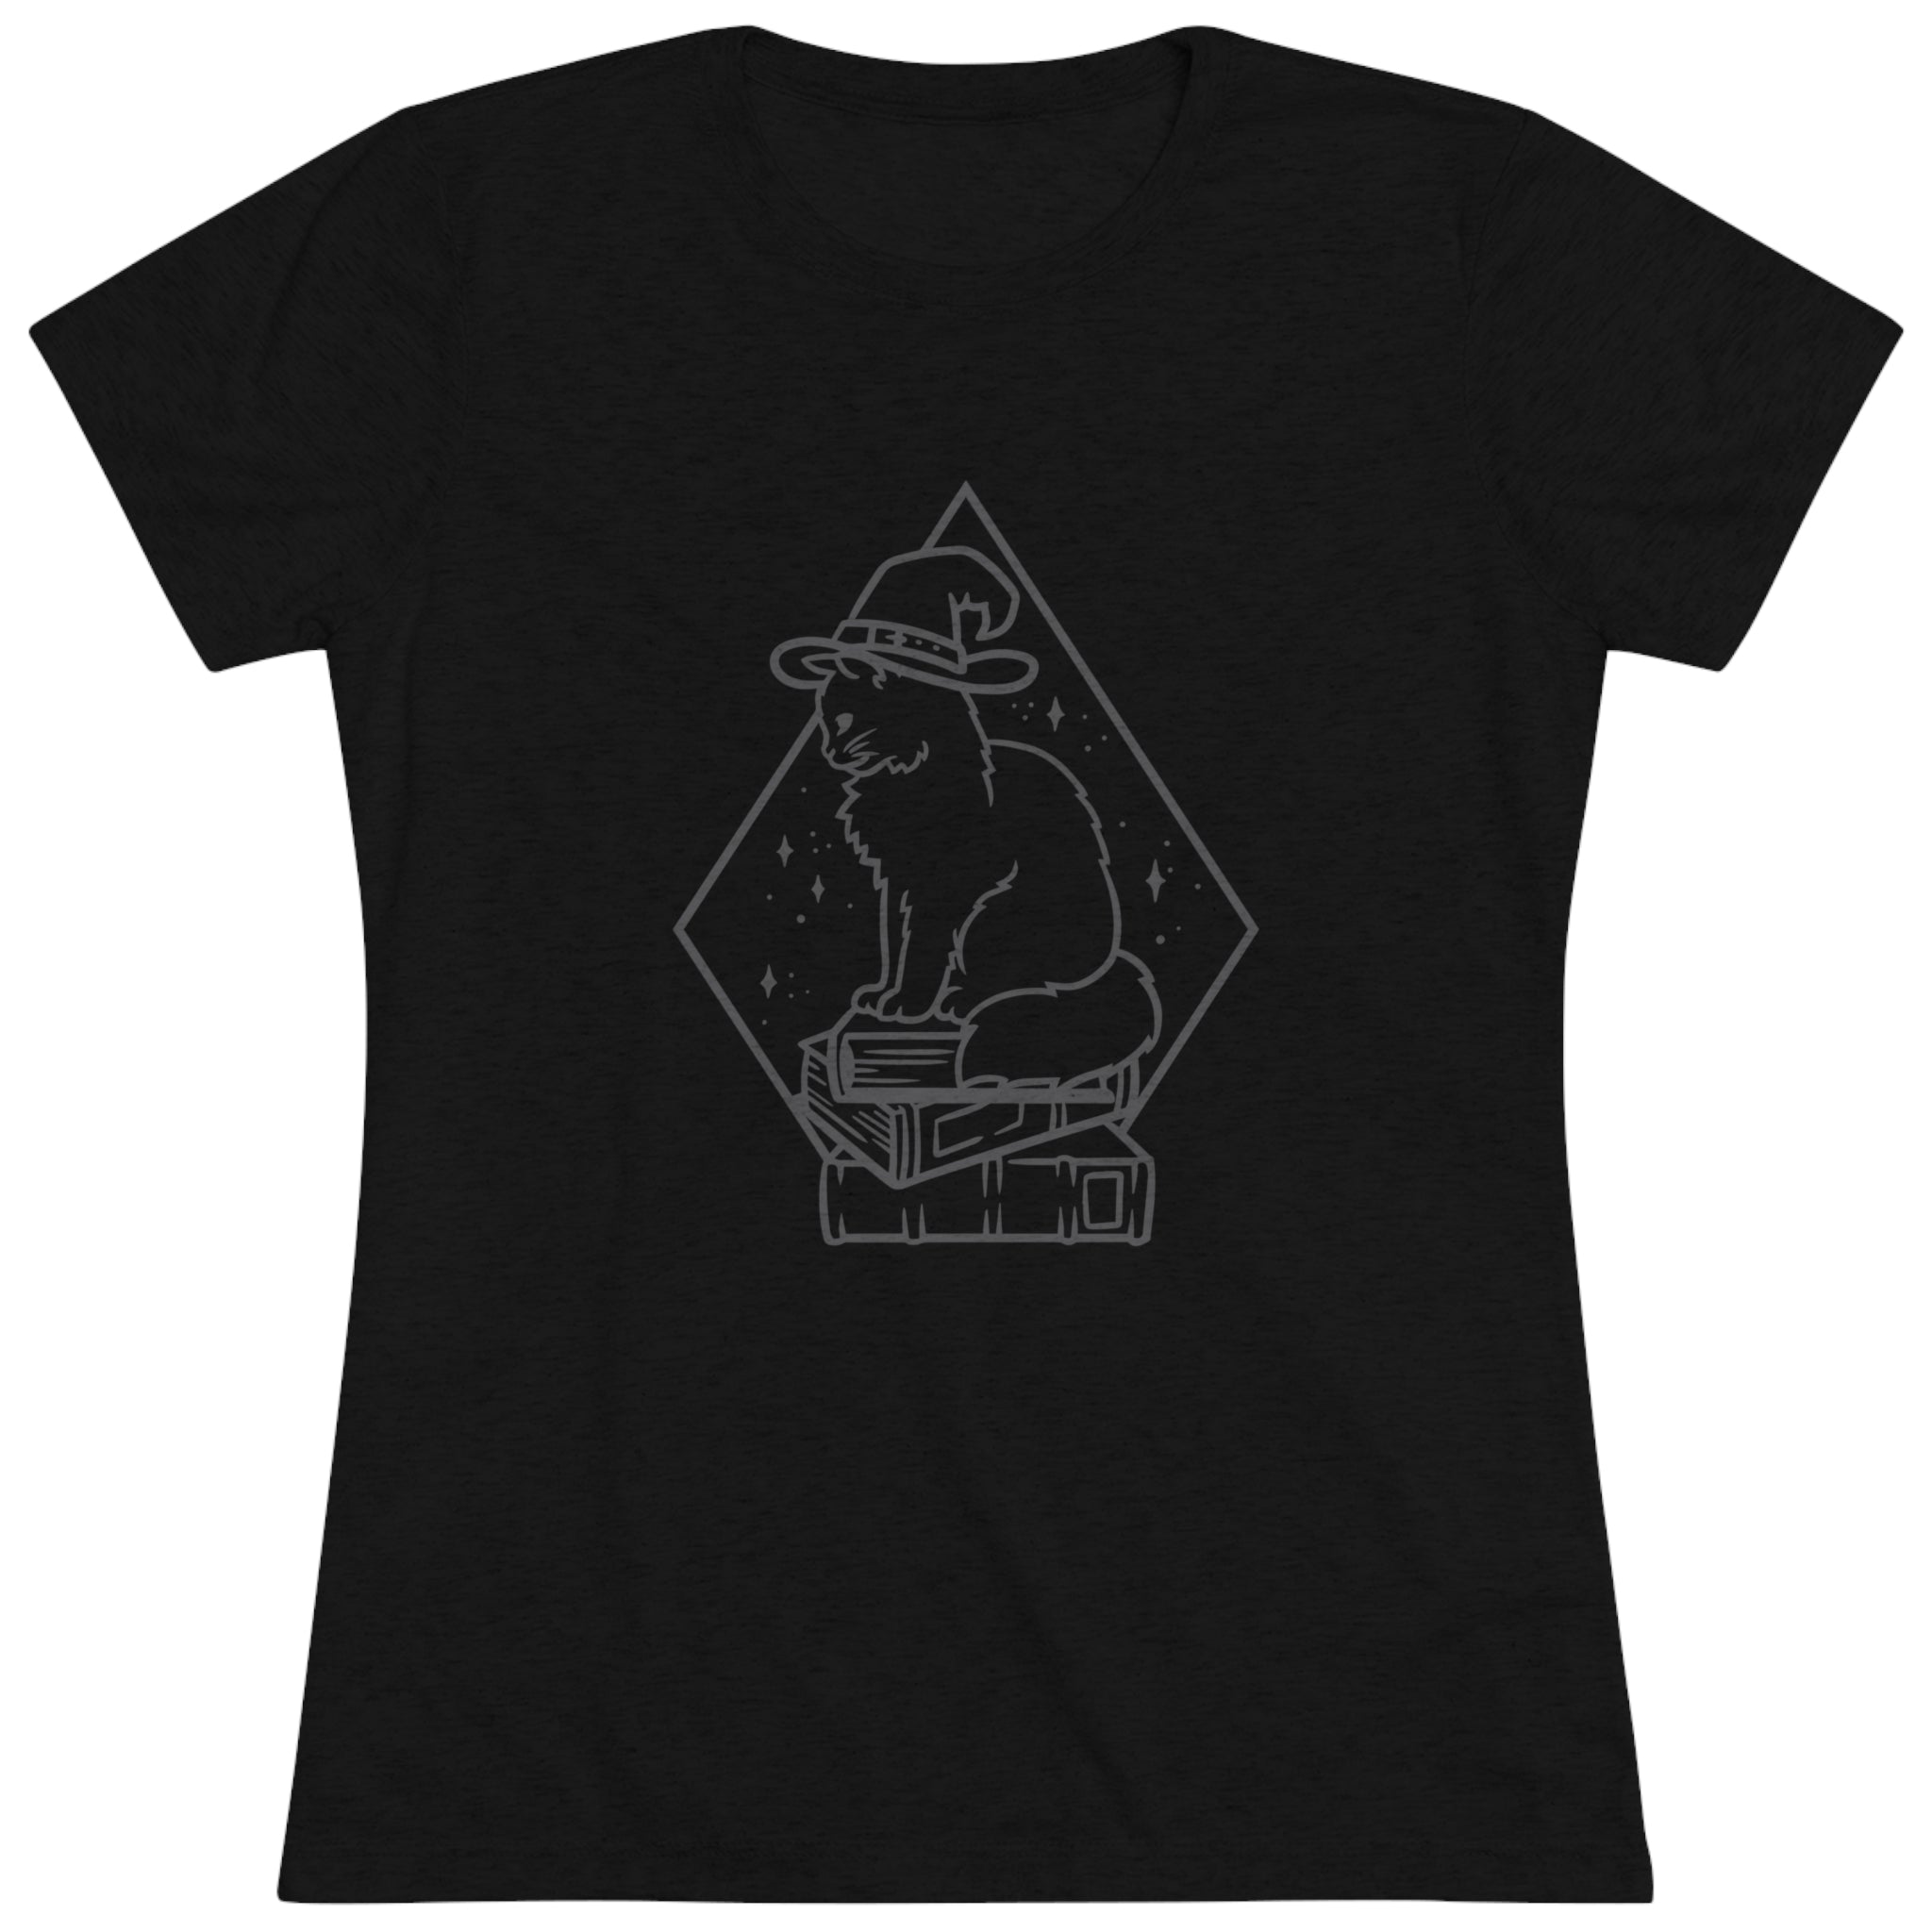 Witchy Kitty Women's Triblend Tee